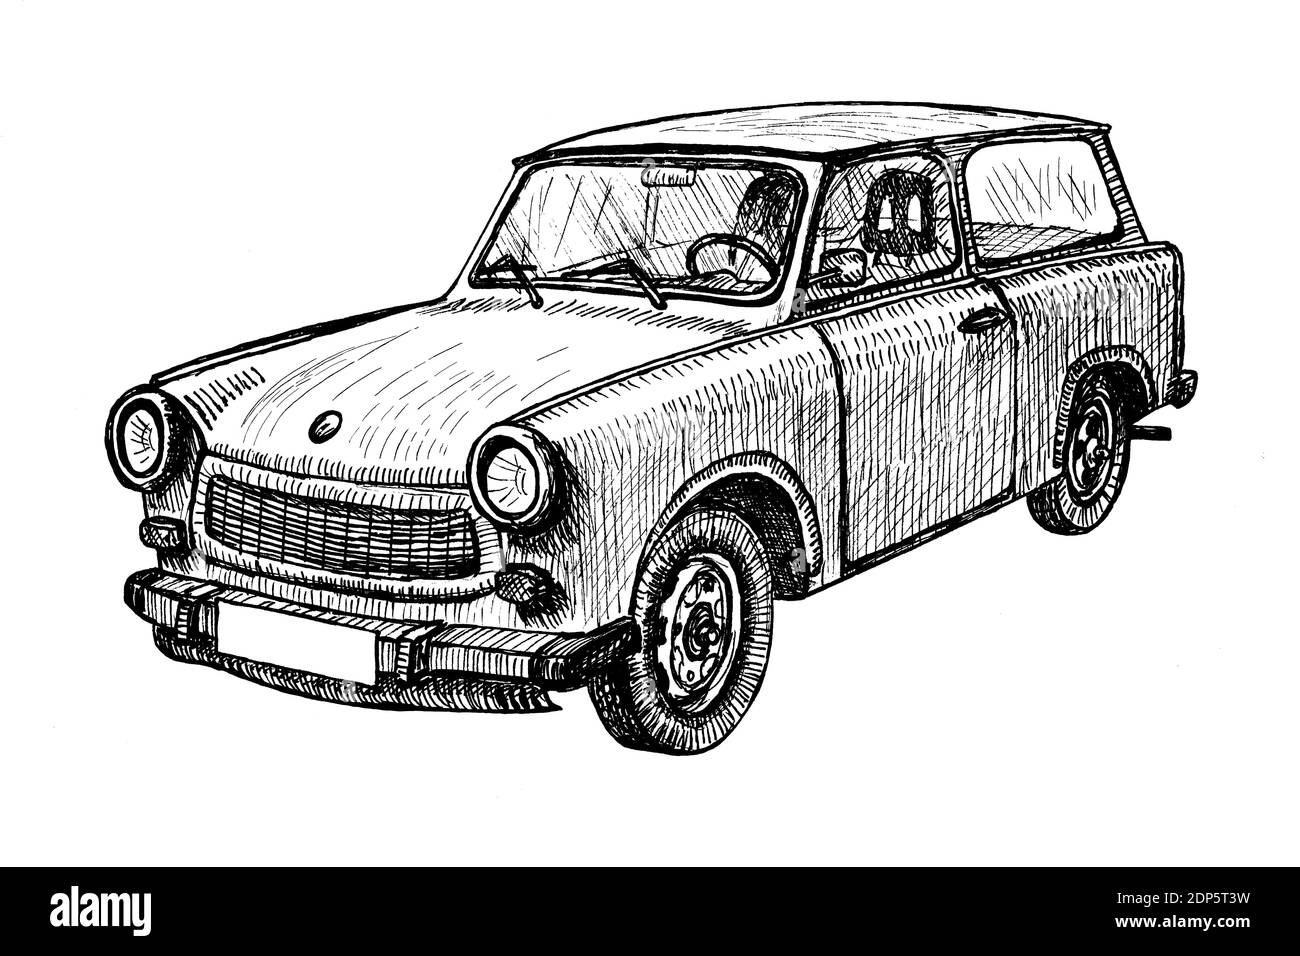 Hand drawn vintage old timer city car, doodle sketch graphics monochrome illustration on white background (originals, no tracing) Stock Photo